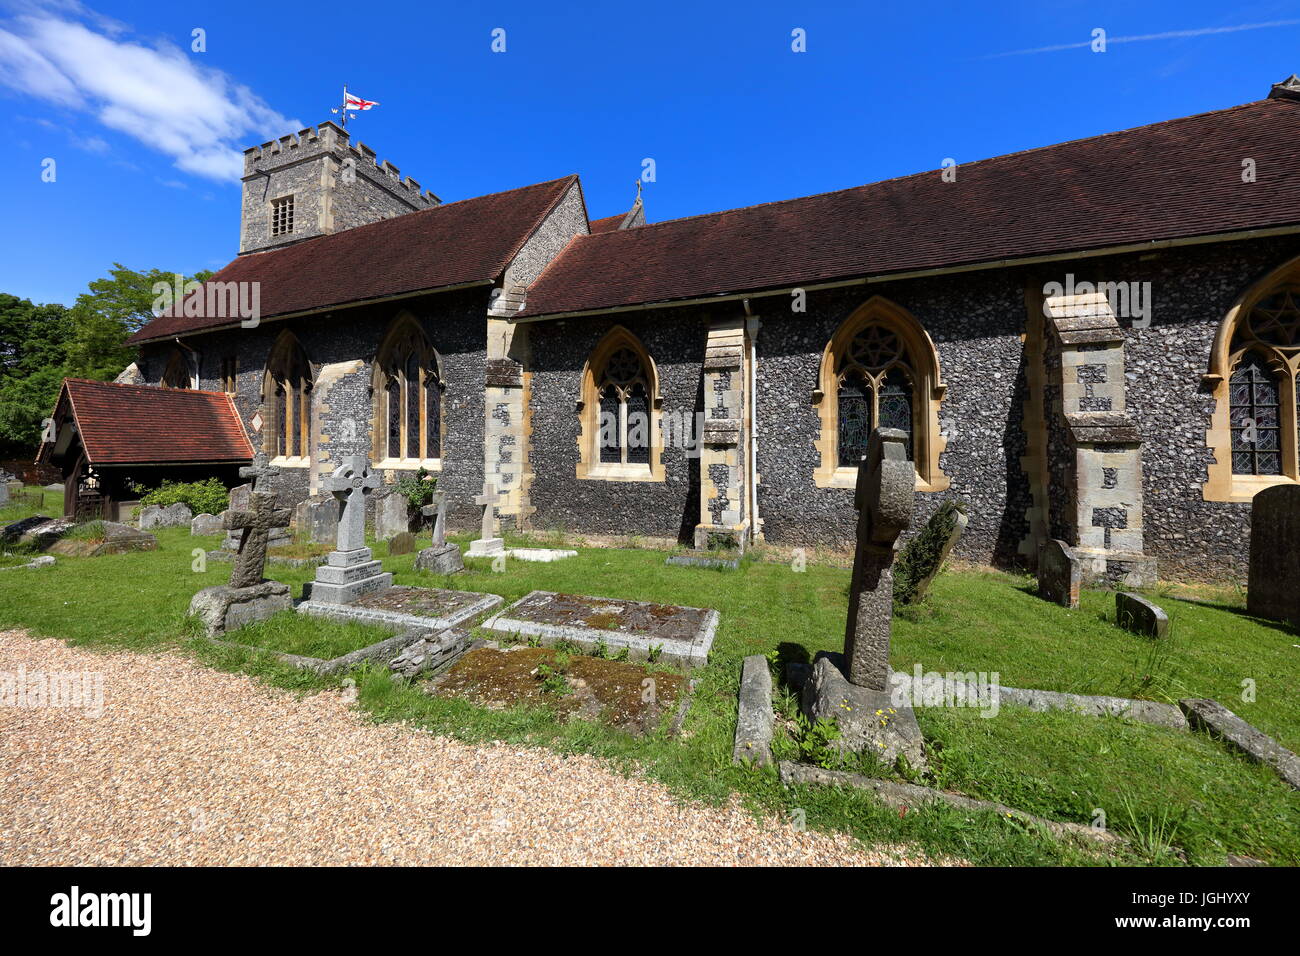 The West side of the village church in Sonning on Thames showing the west entrance amidst the headstones in the neatly kept churchyard. Stock Photo